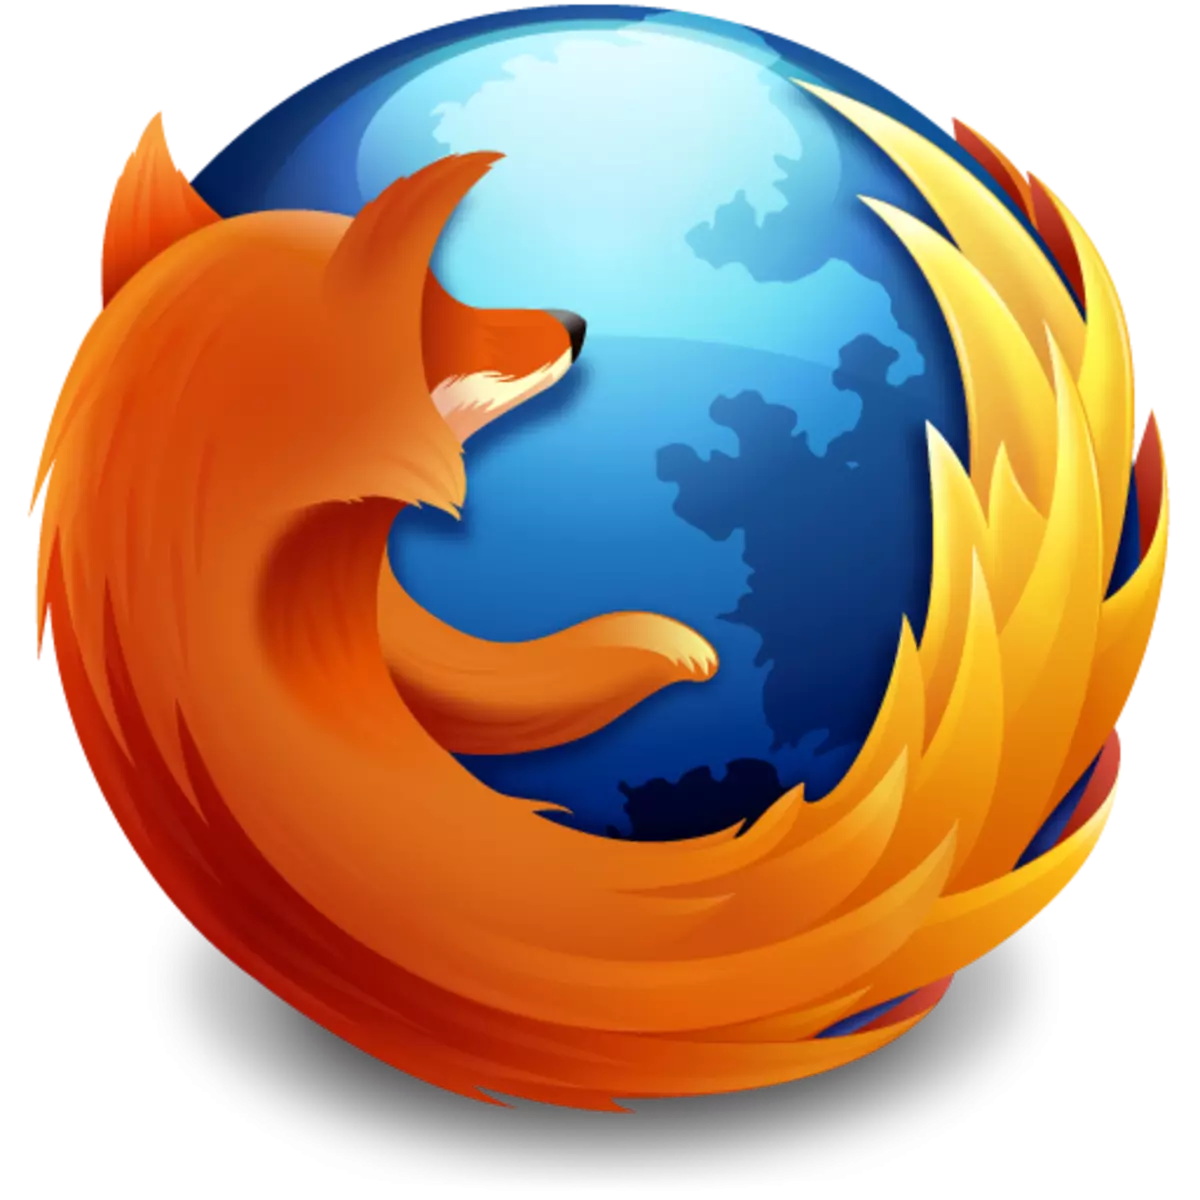 Best additions for Firefox